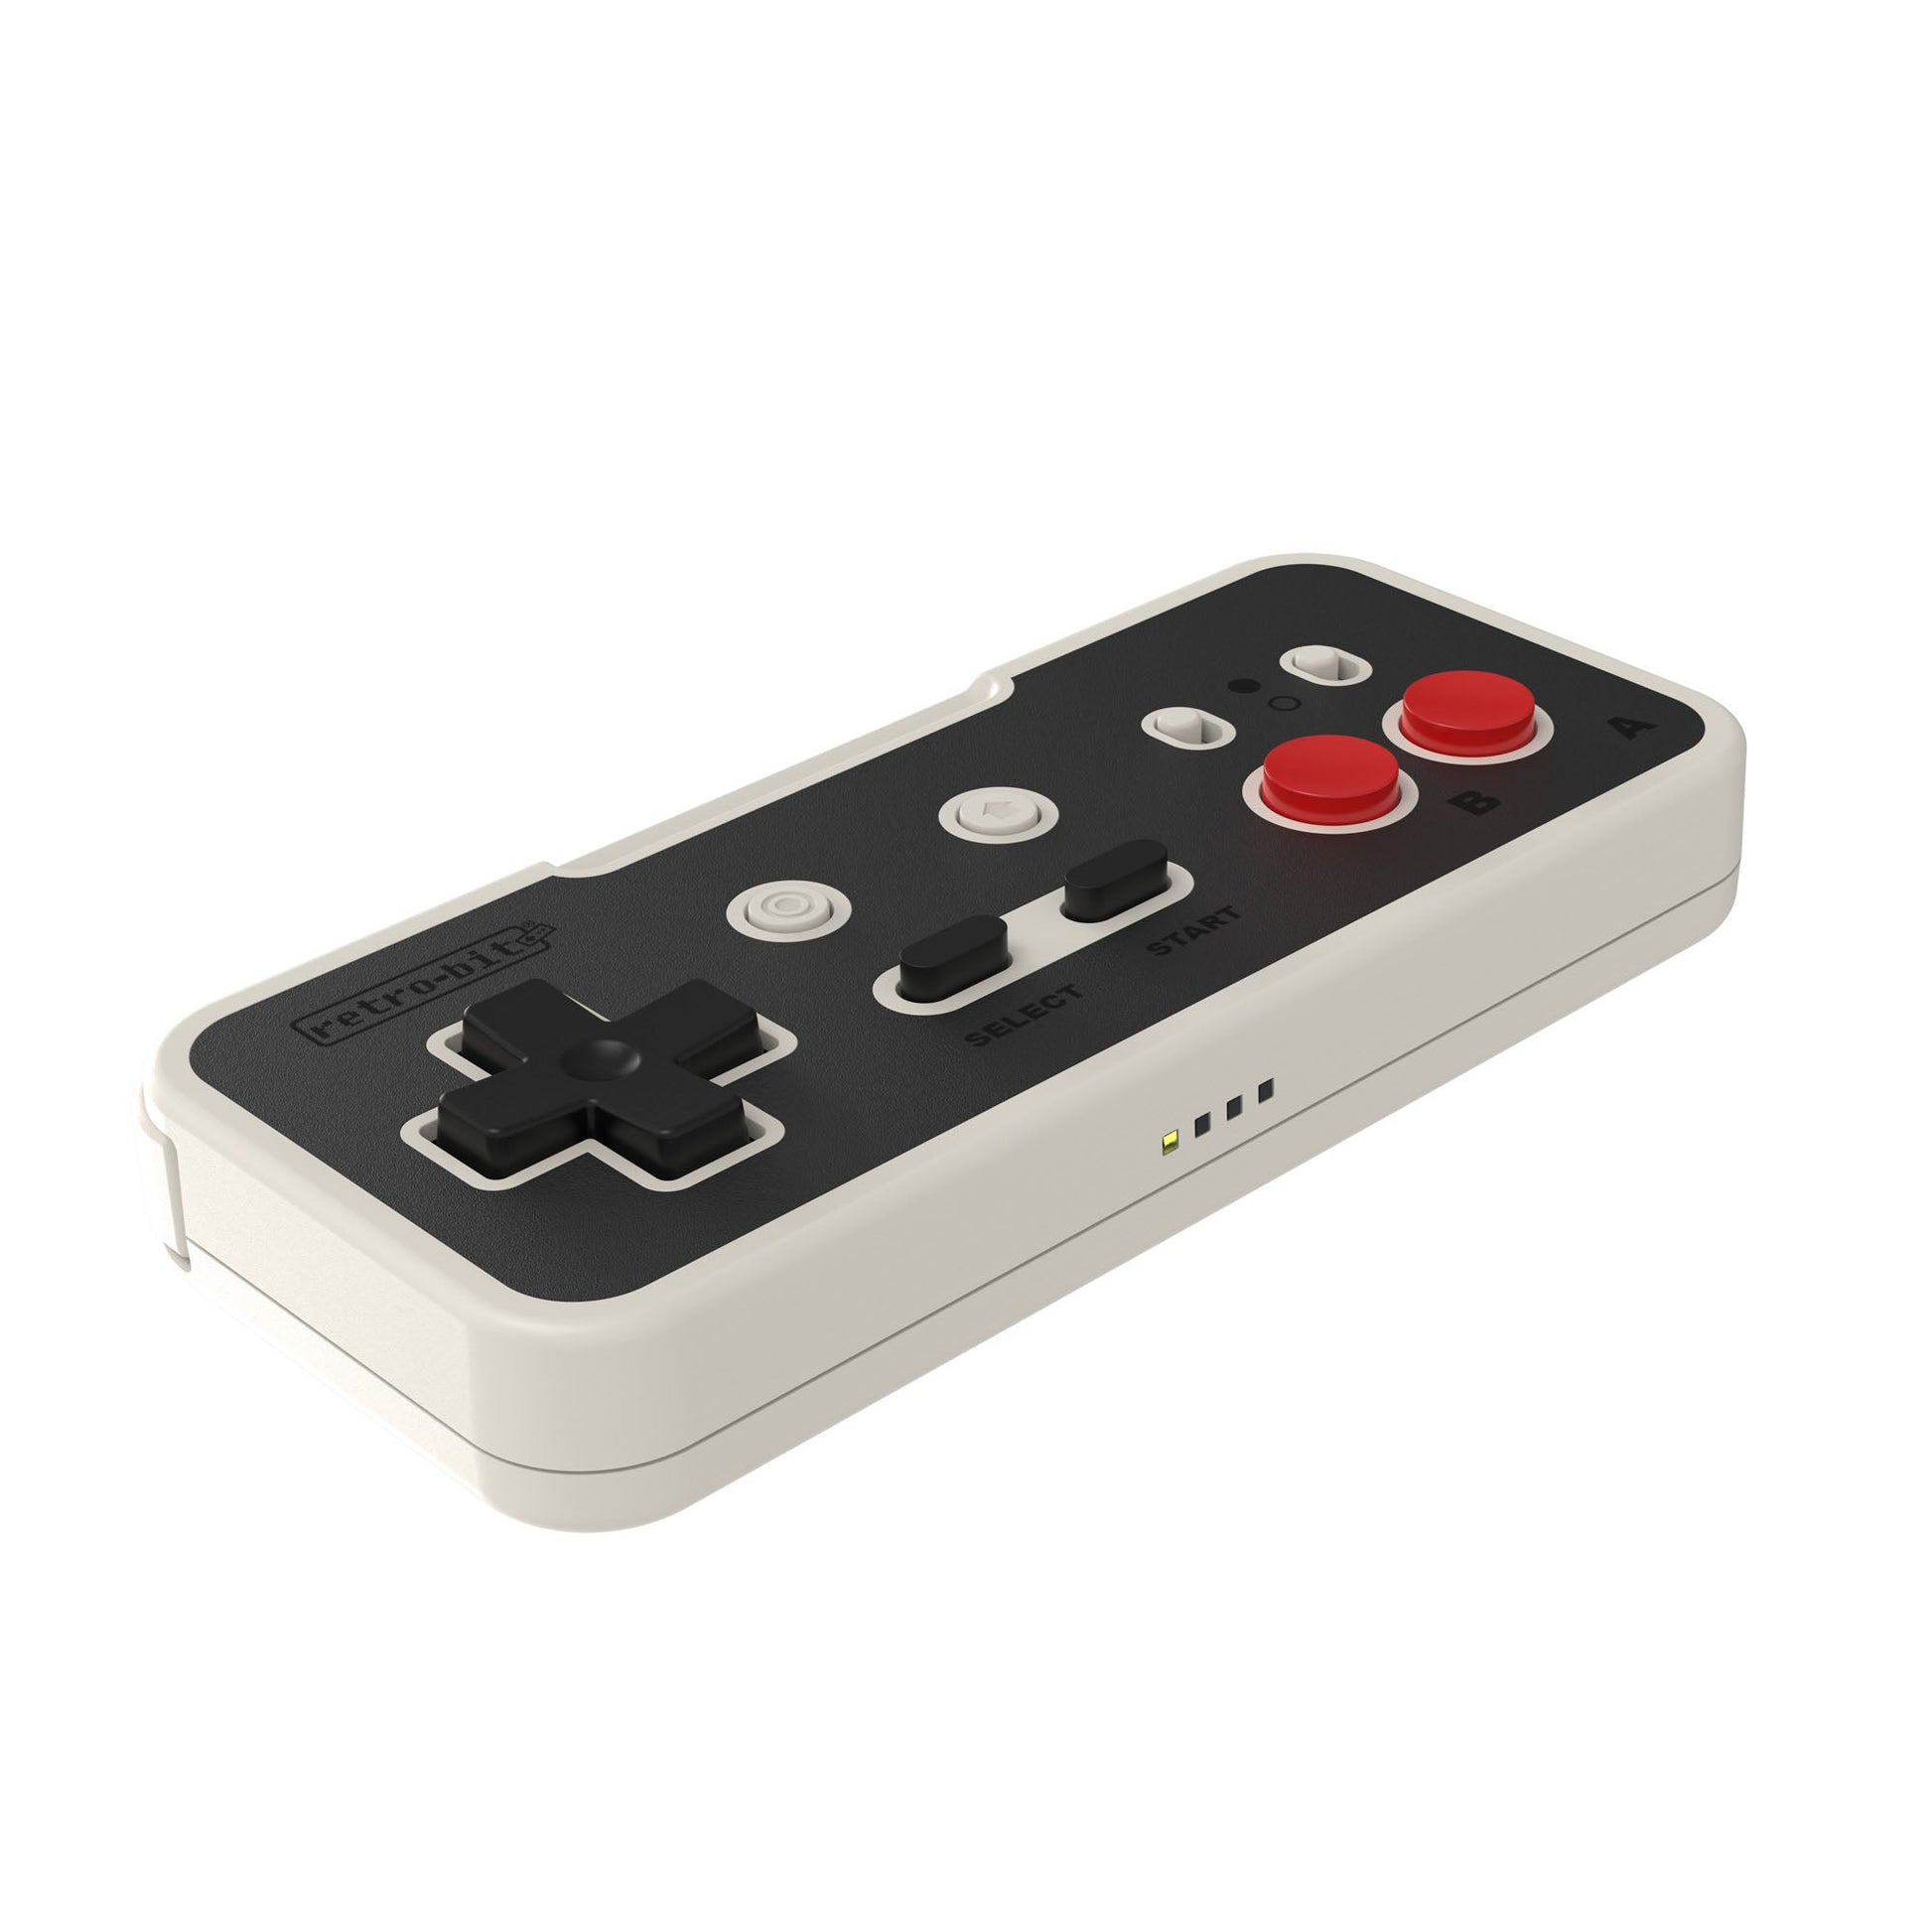 Legacy16 Wired USB Controller